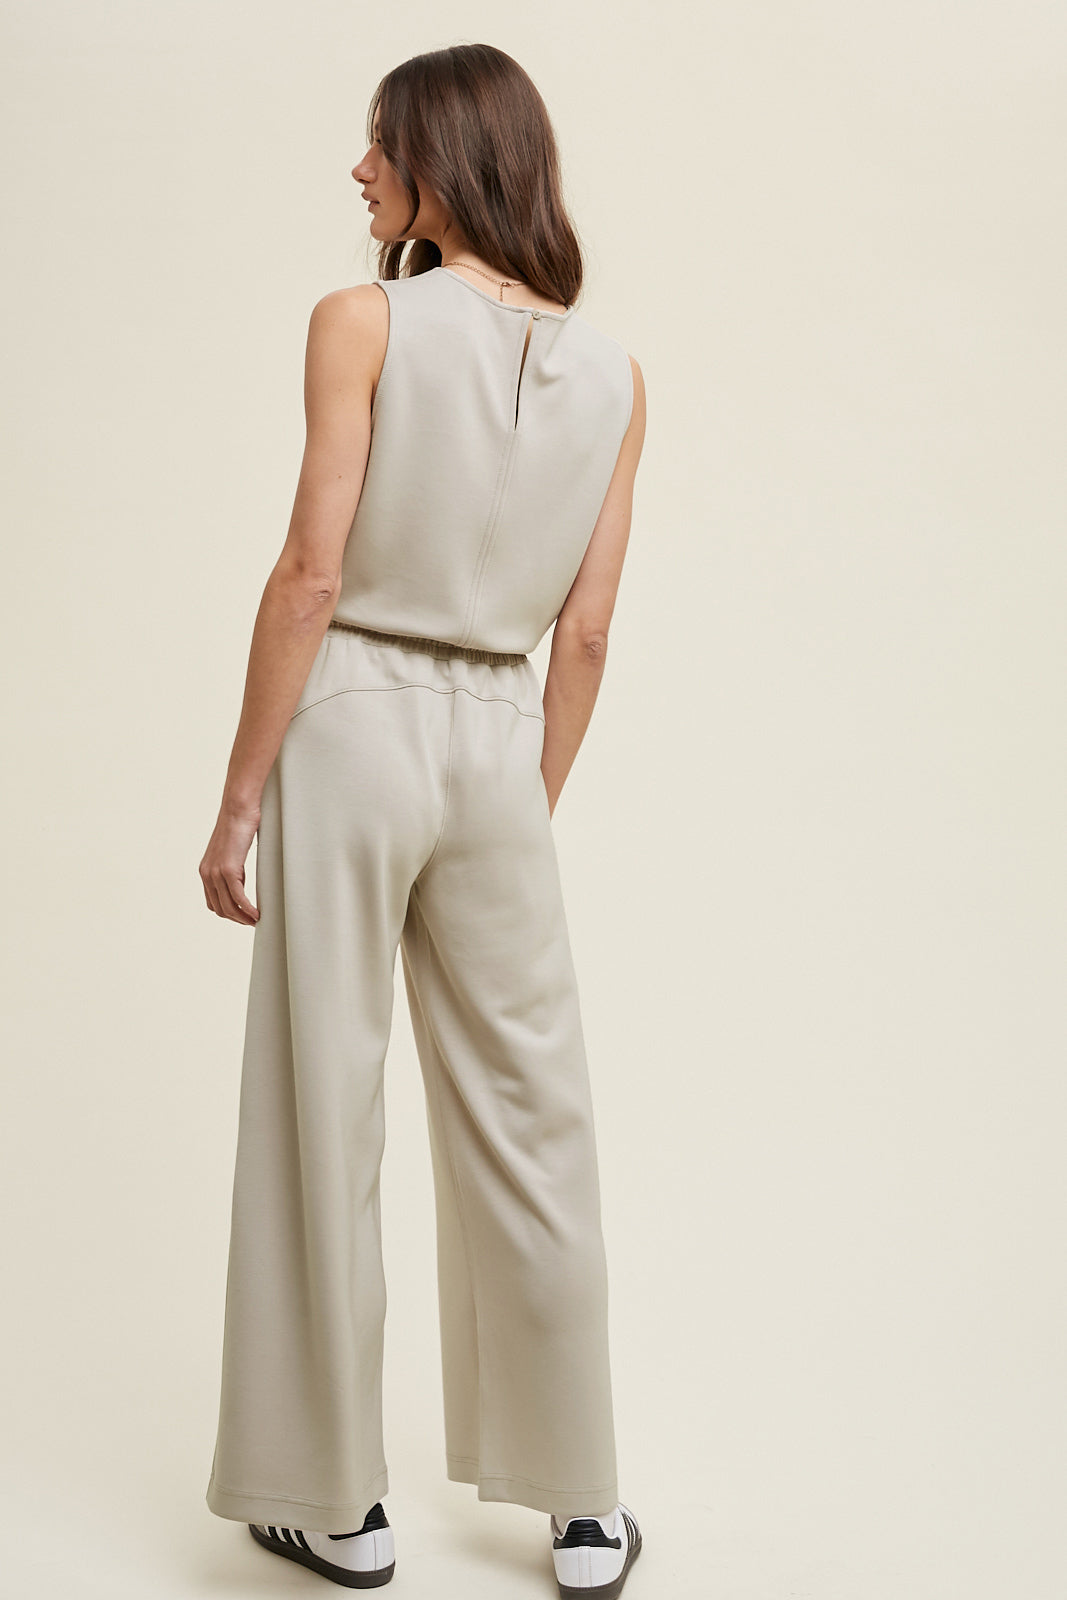 Wide leg Tank jumpsuit 40%off use code sale40 at checkout